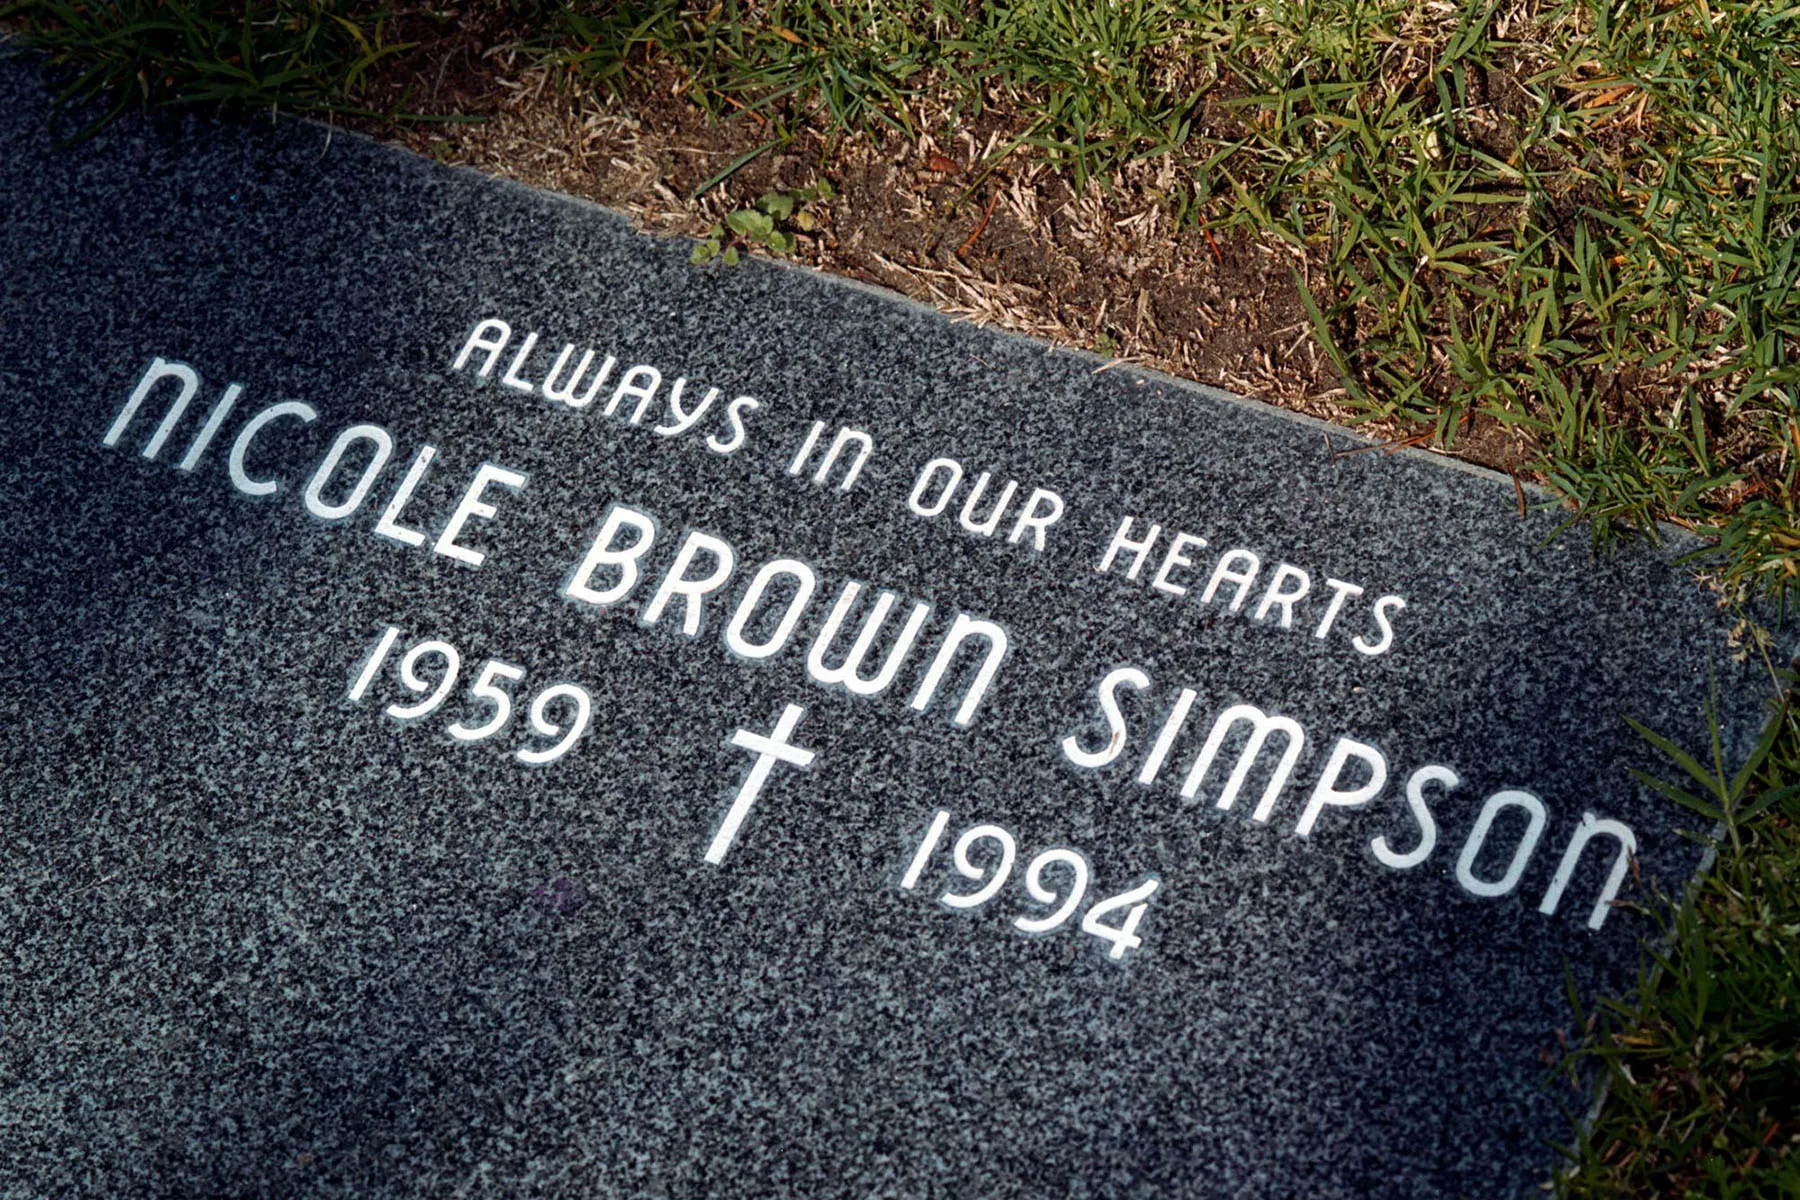 The grave of Nicole Brown Simpson reads 